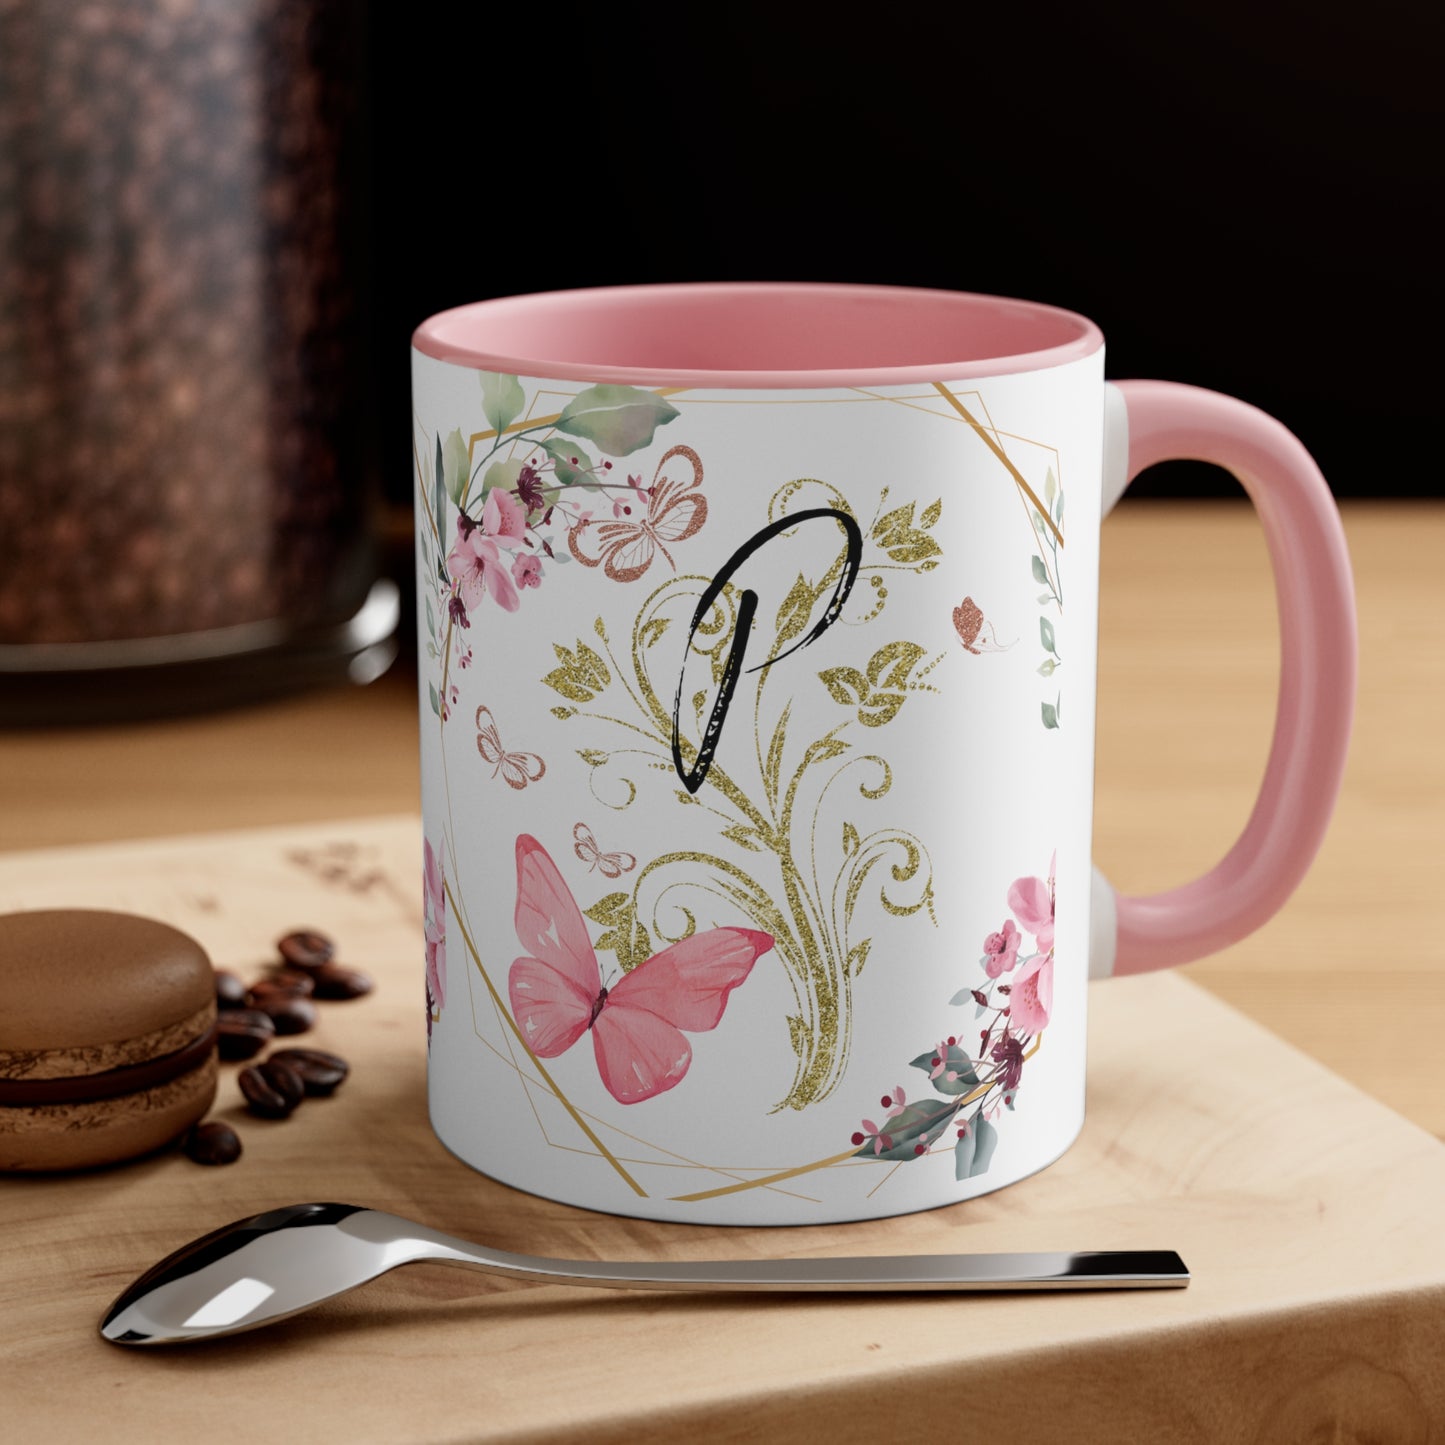 Personalized coffee mug: Add a special touch to your mornings